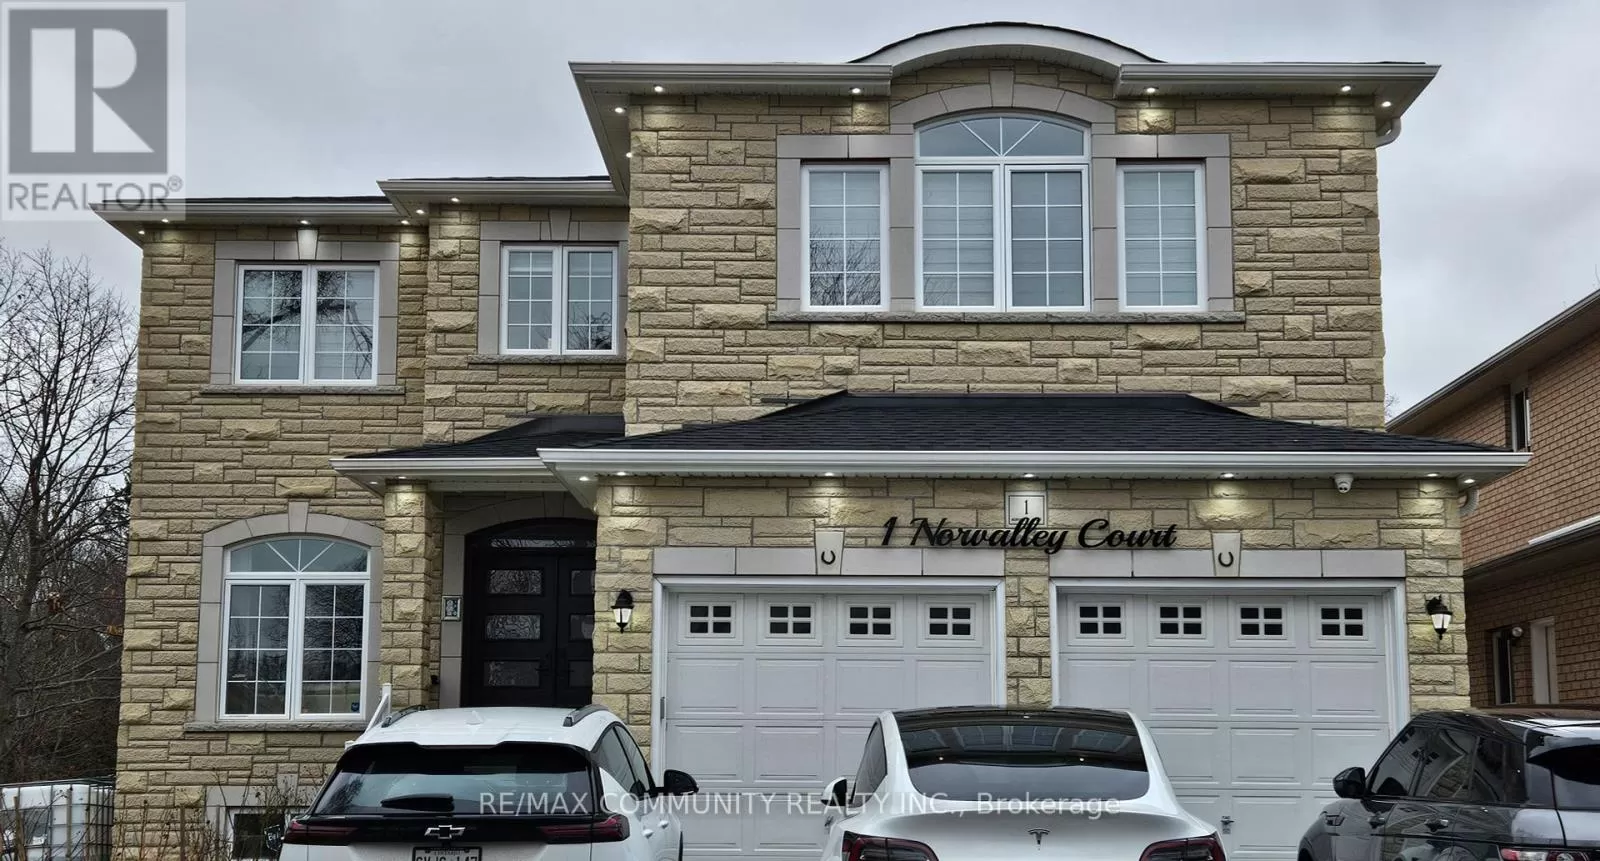 Other for rent: 1 Norvalley Court, Toronto, Ontario M1C 4Y7